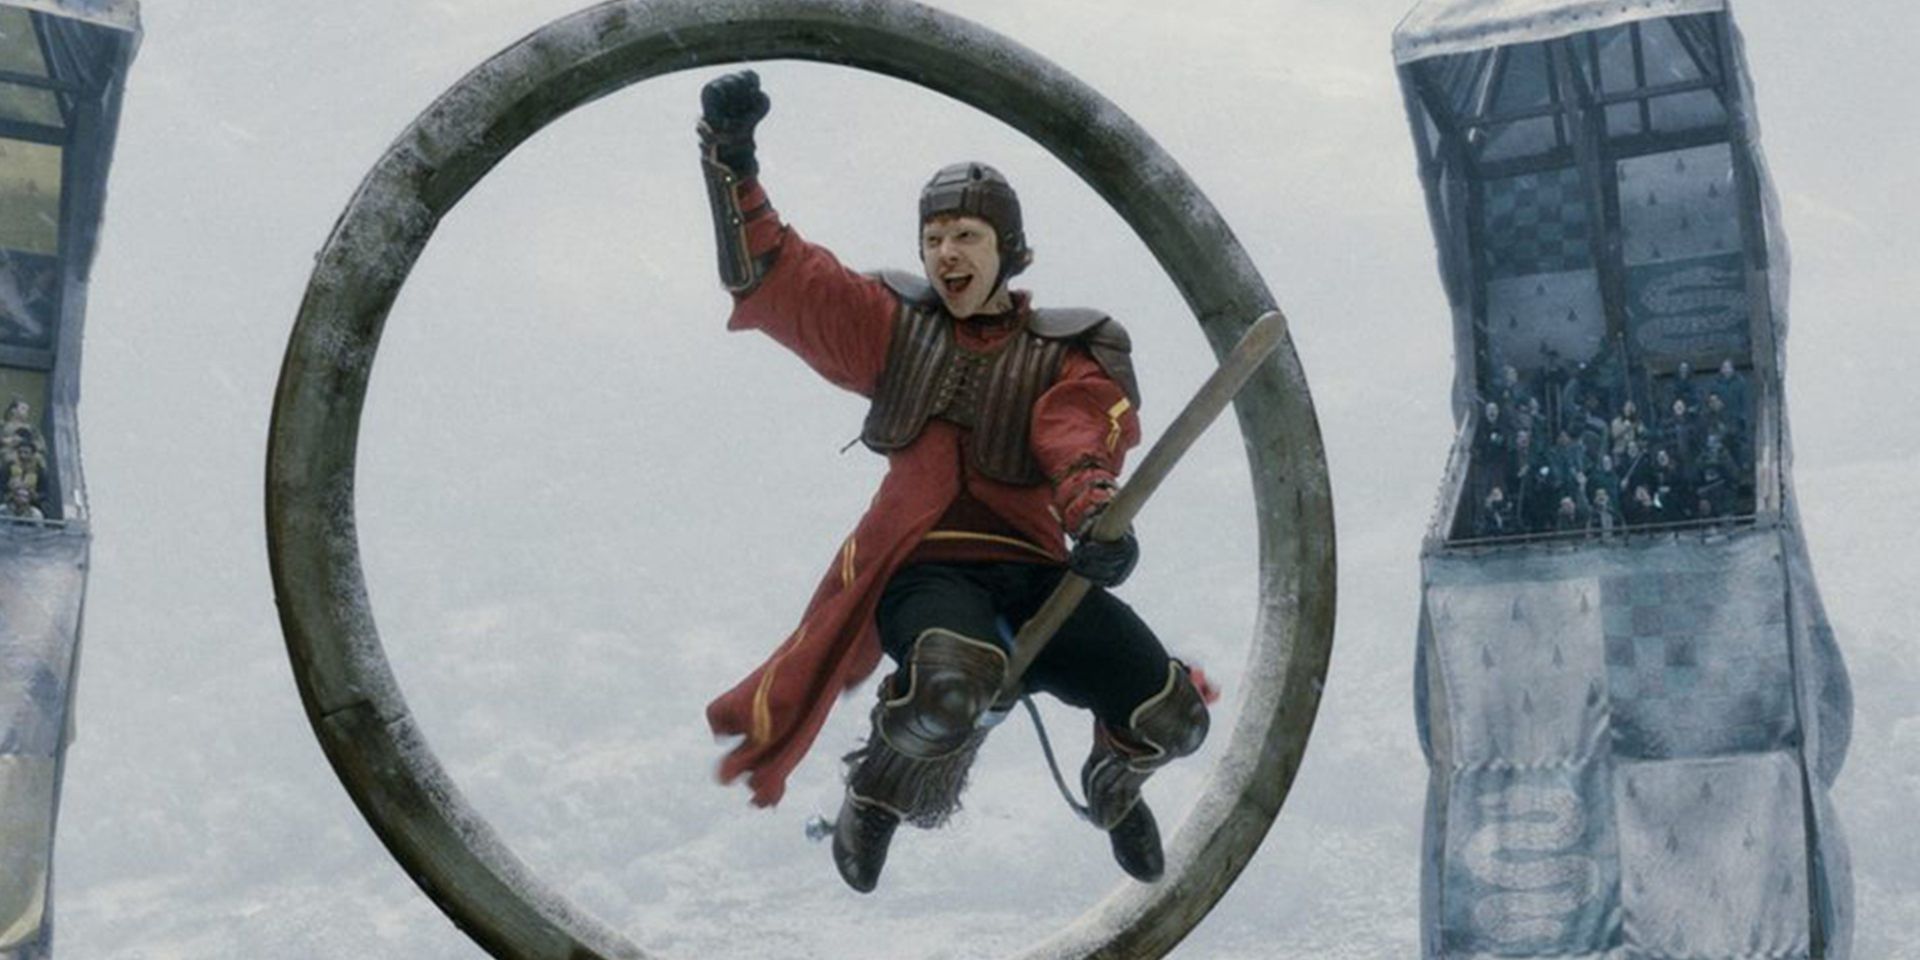 Ron Weasley playing Quidditch at Hogwarts in Harry Potter